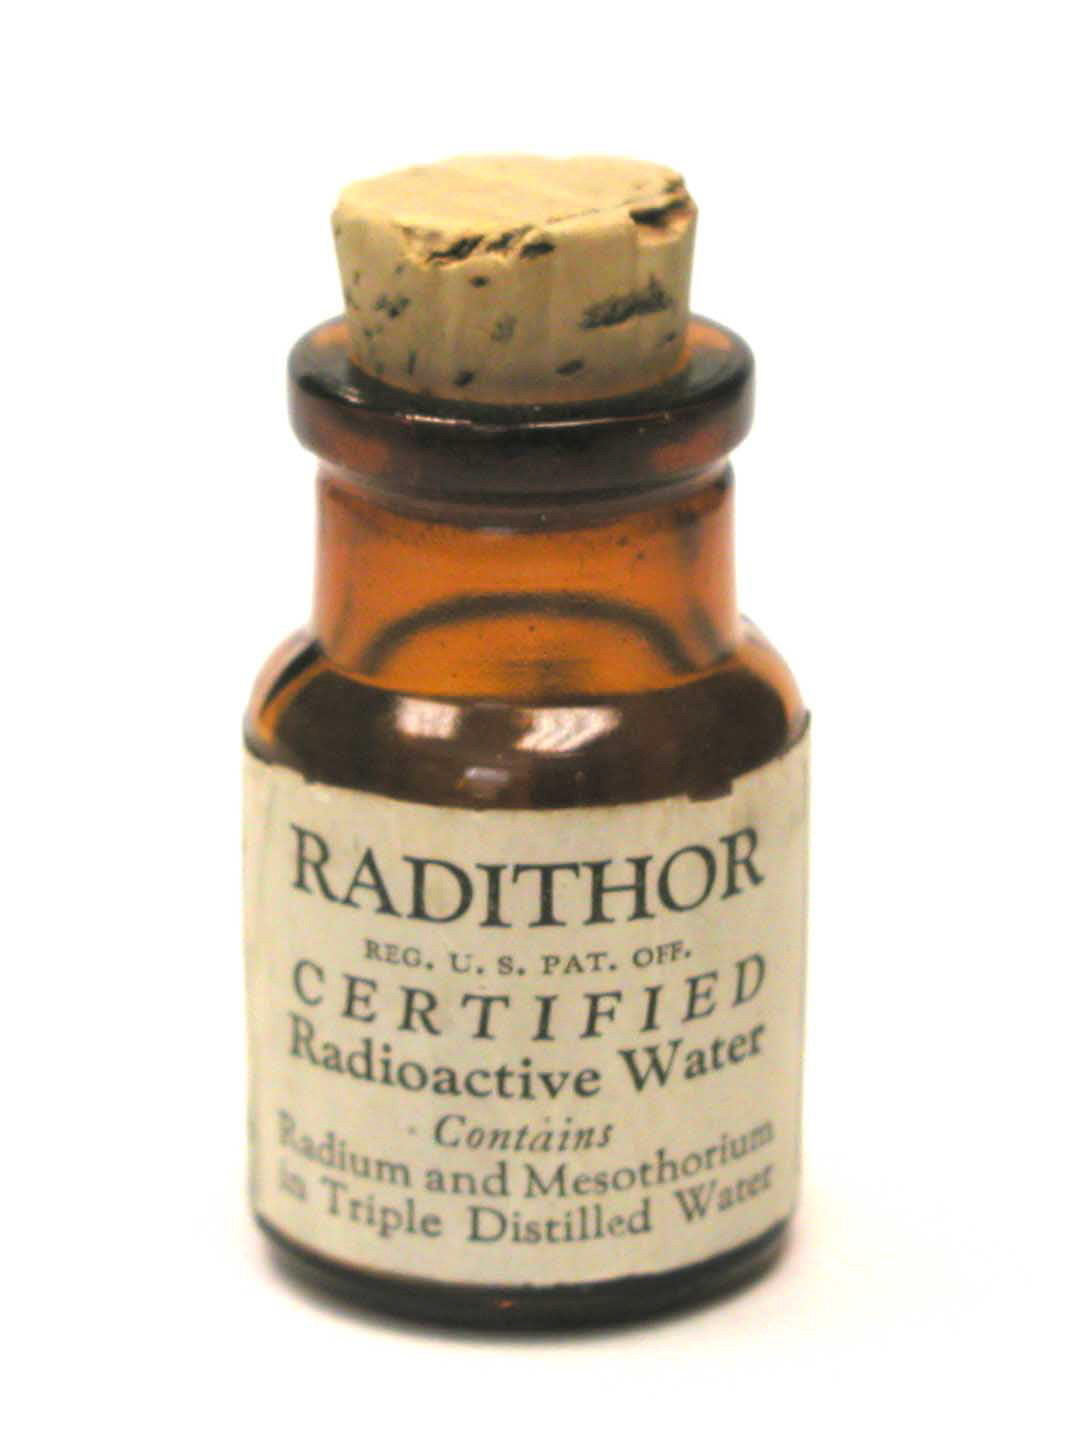 Radithor, a quack radiation cure, promised to fix all sorts of ailments that it actually didn't.